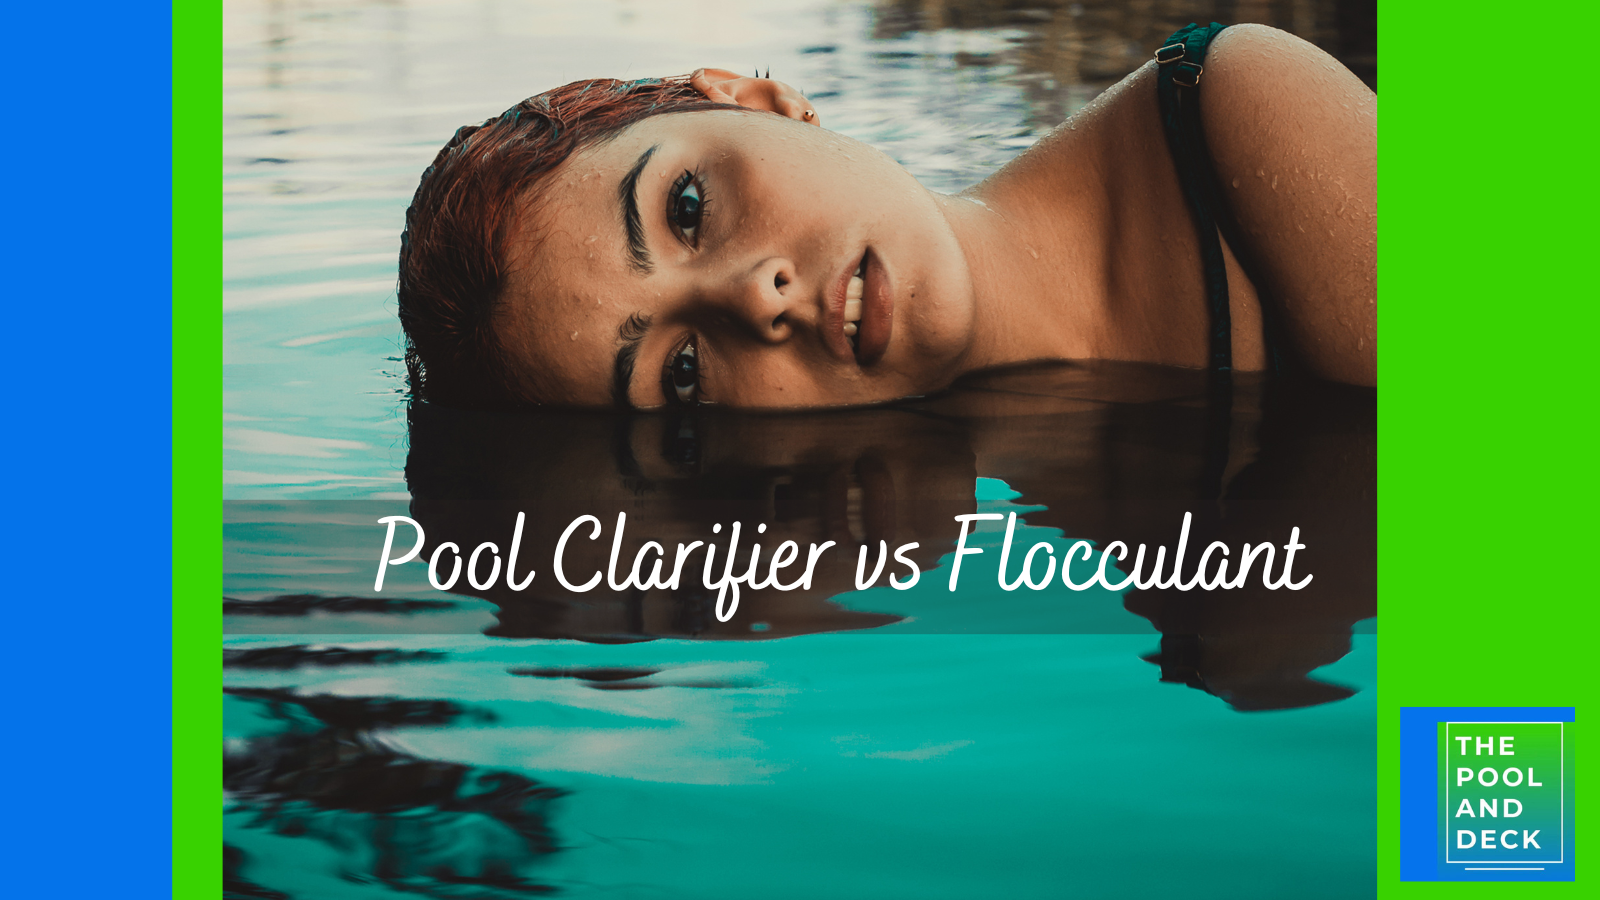 Pool Clarifier vs Flocculant: What is Better? When?